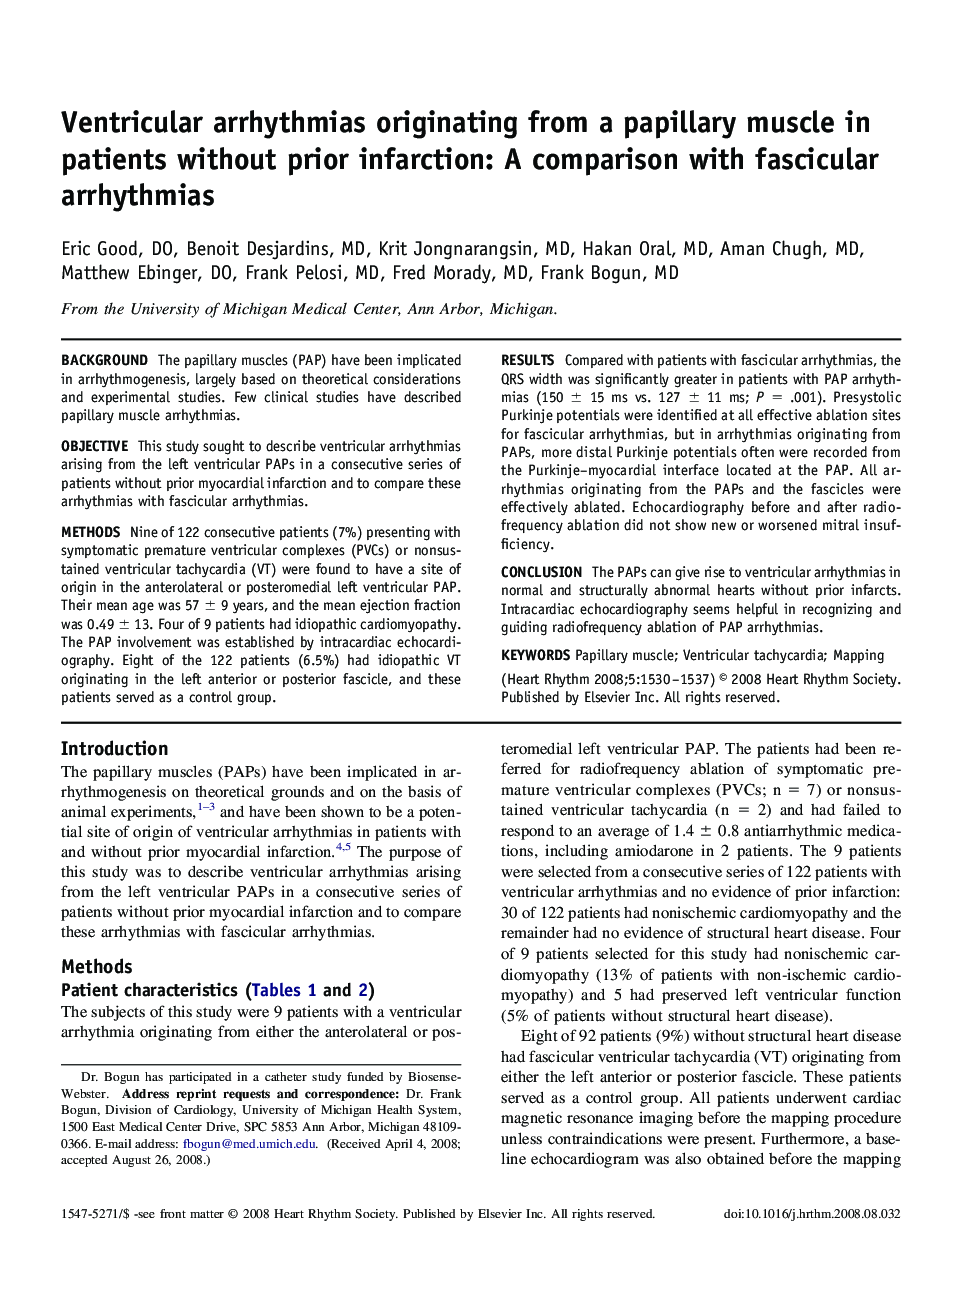 Ventricular arrhythmias originating from a papillary muscle in patients without prior infarction: A comparison with fascicular arrhythmias 